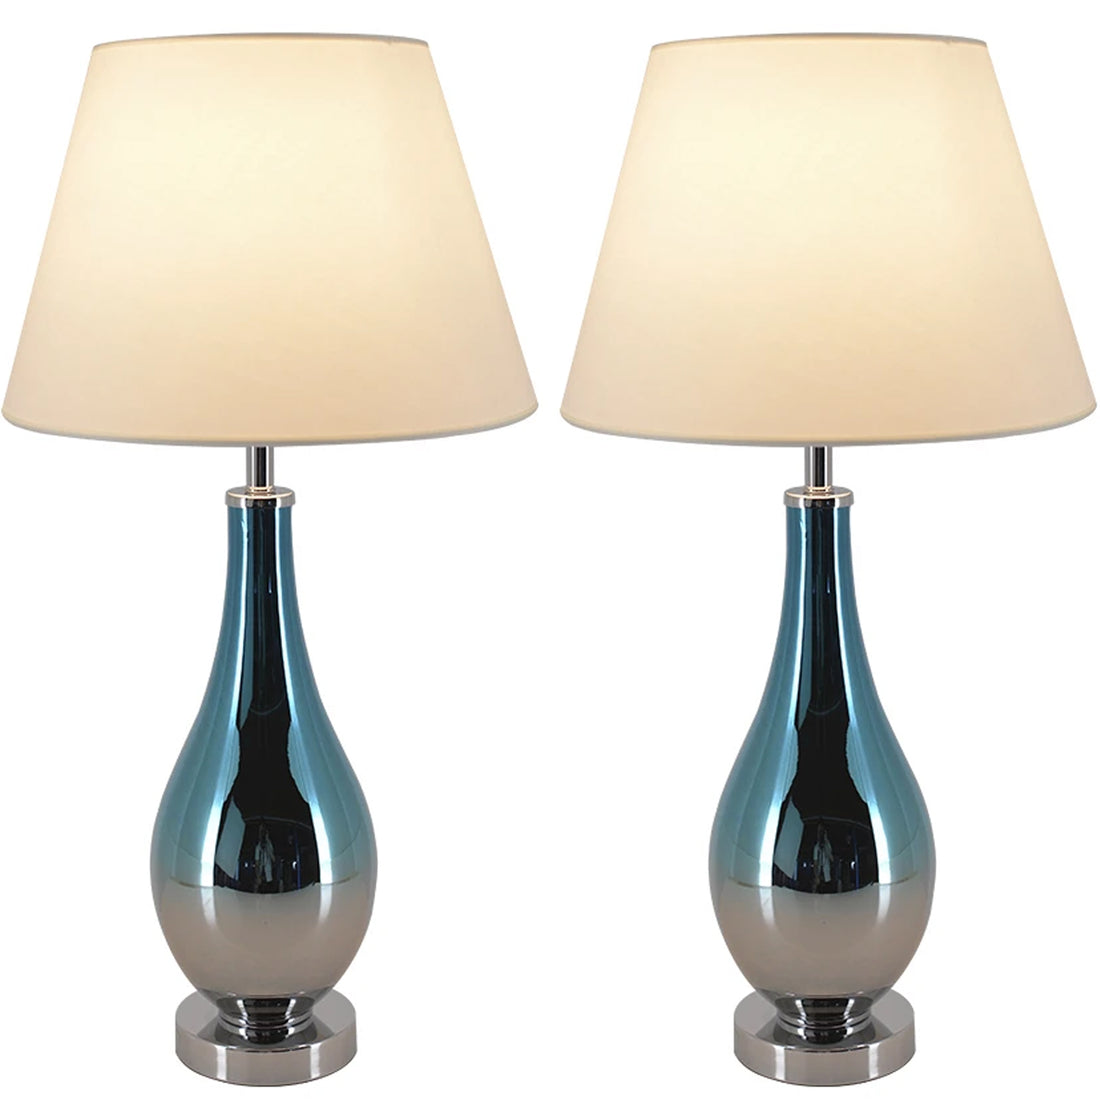 Carro Home Tulip Ombre Droplet Glass Table Lamp 28&quot; - Blue Chrome Ombre/Creme (Set of 2) 